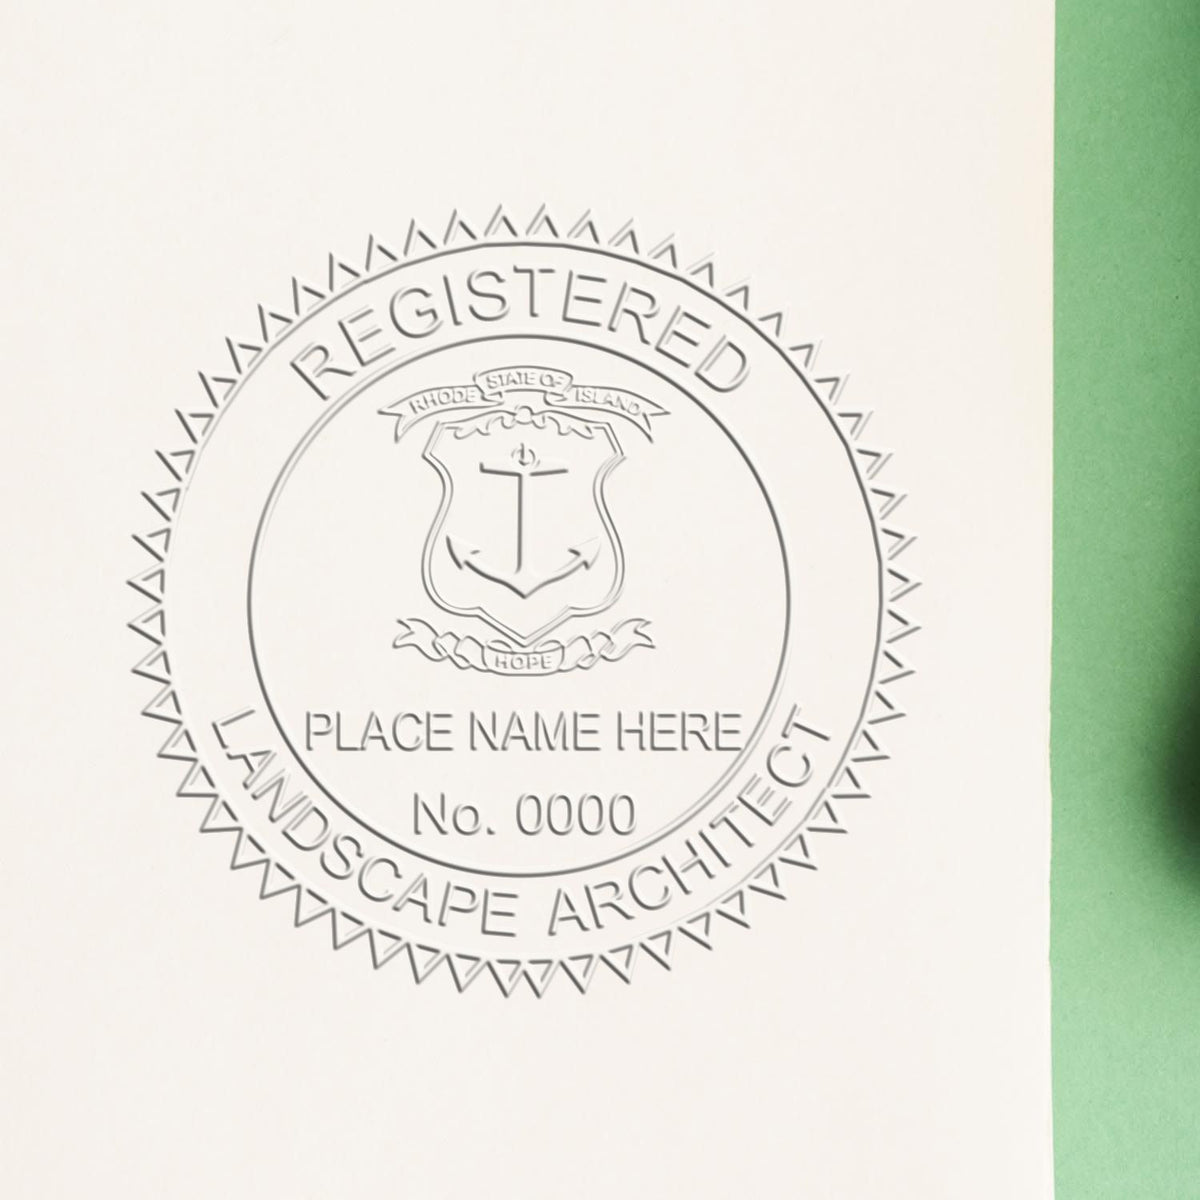 The Soft Pocket Rhode Island Landscape Architect Embosser stamp impression comes to life with a crisp, detailed photo on paper - showcasing true professional quality.